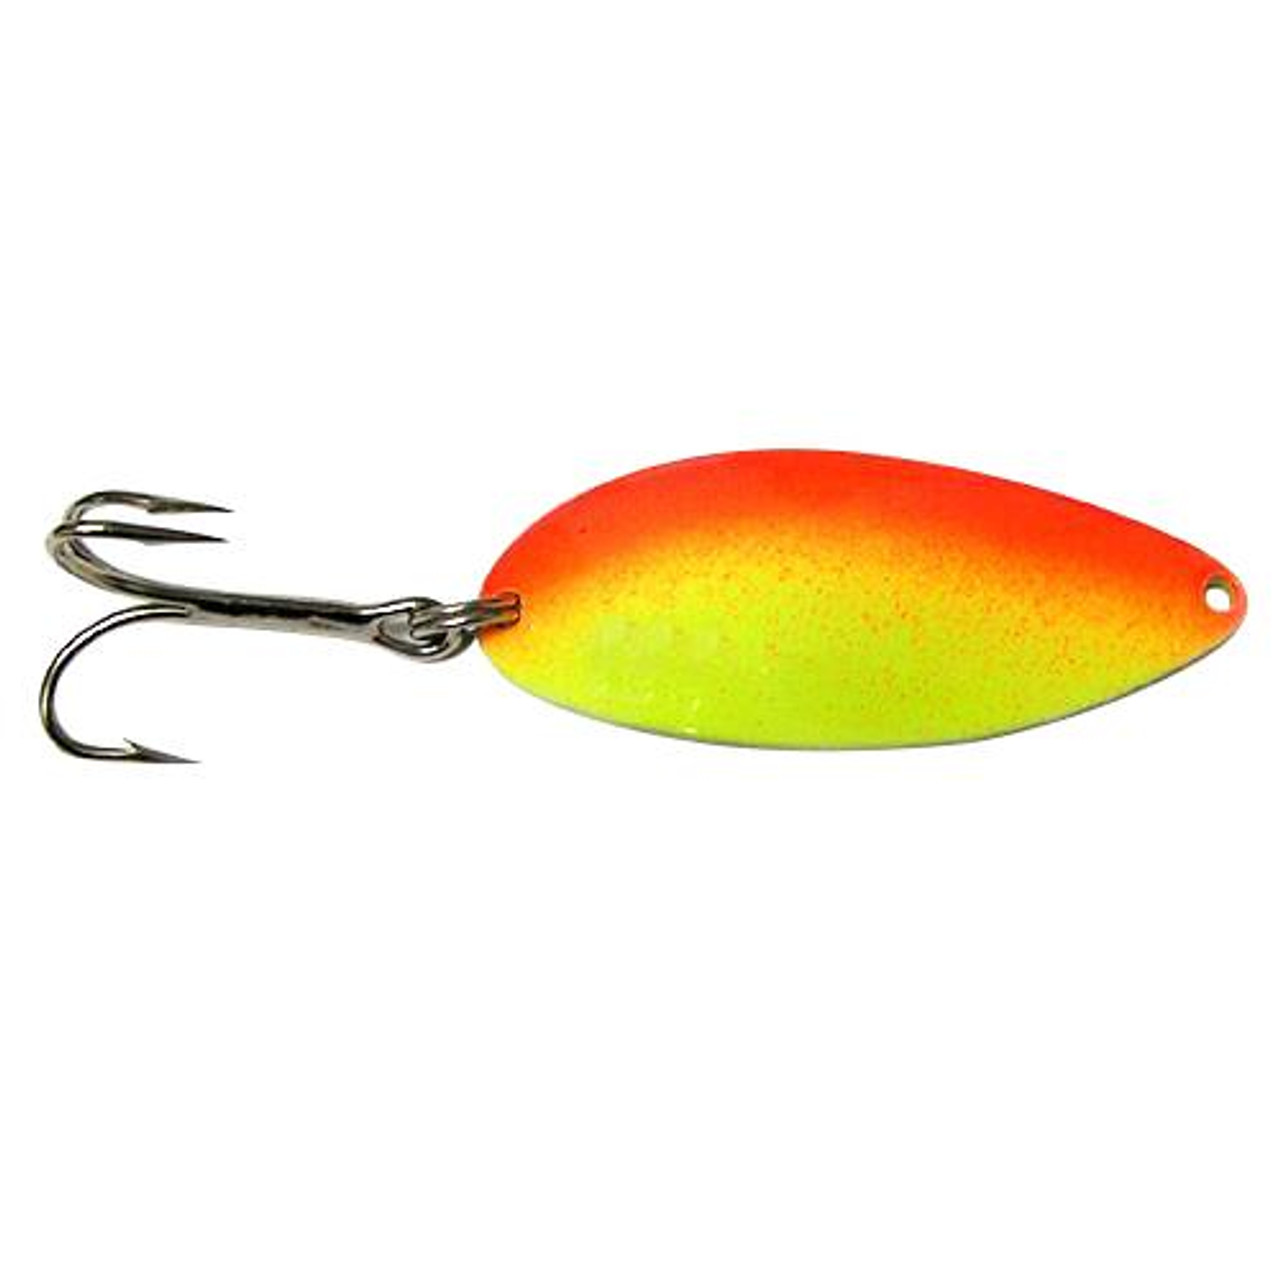 Acme Little Cleo Fishing Lure, Silver, 3/4-Ounce